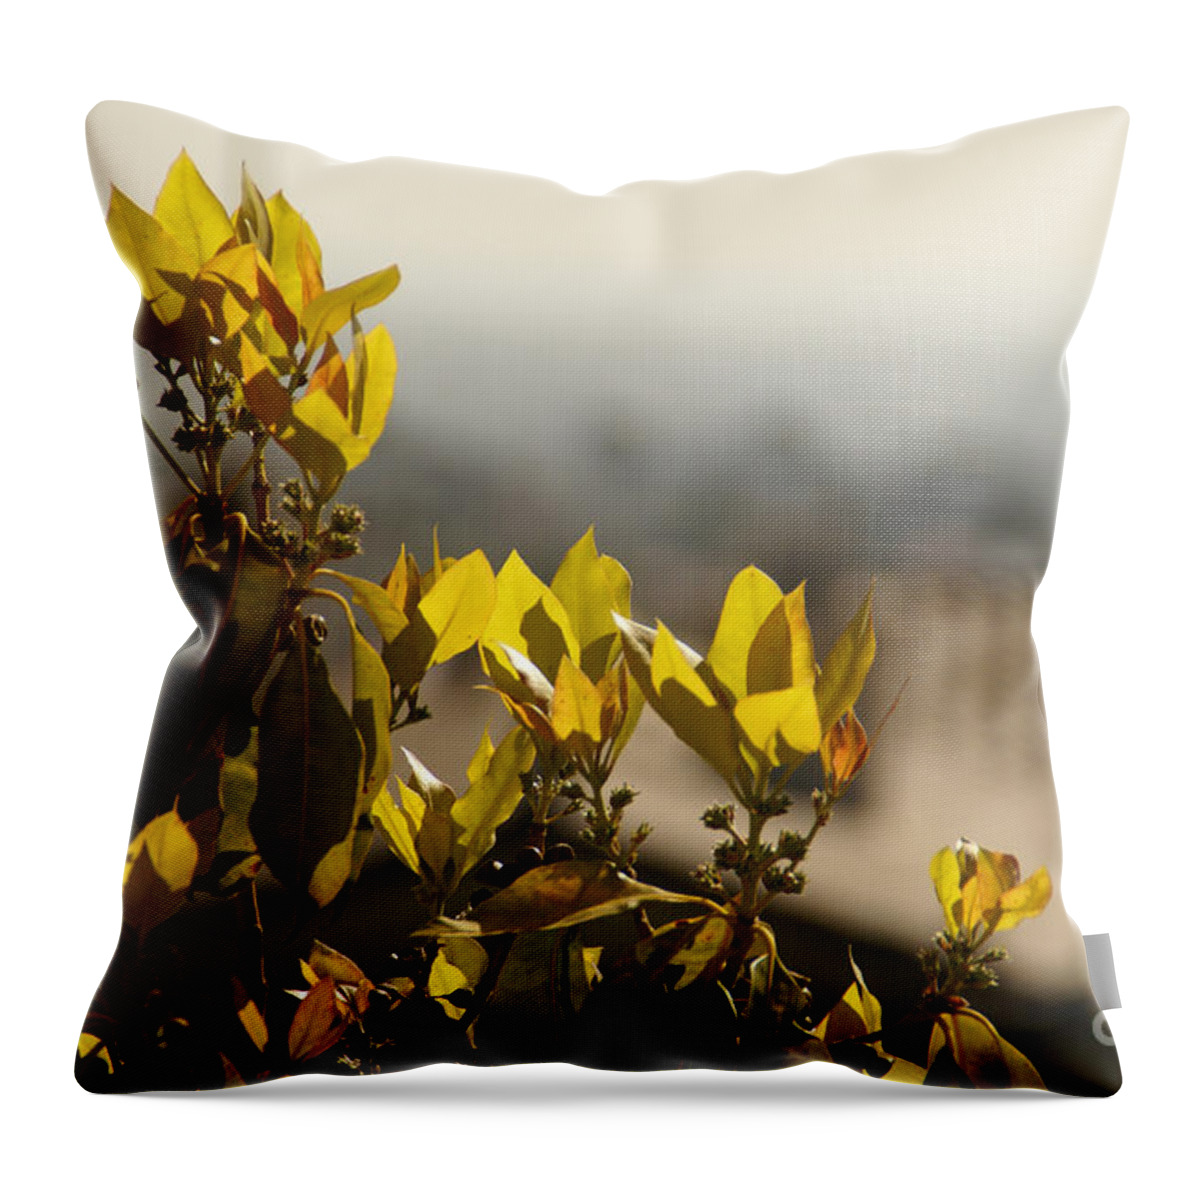 Tree Throw Pillow featuring the photograph Rise Above The Spanish Tile by Linda Shafer